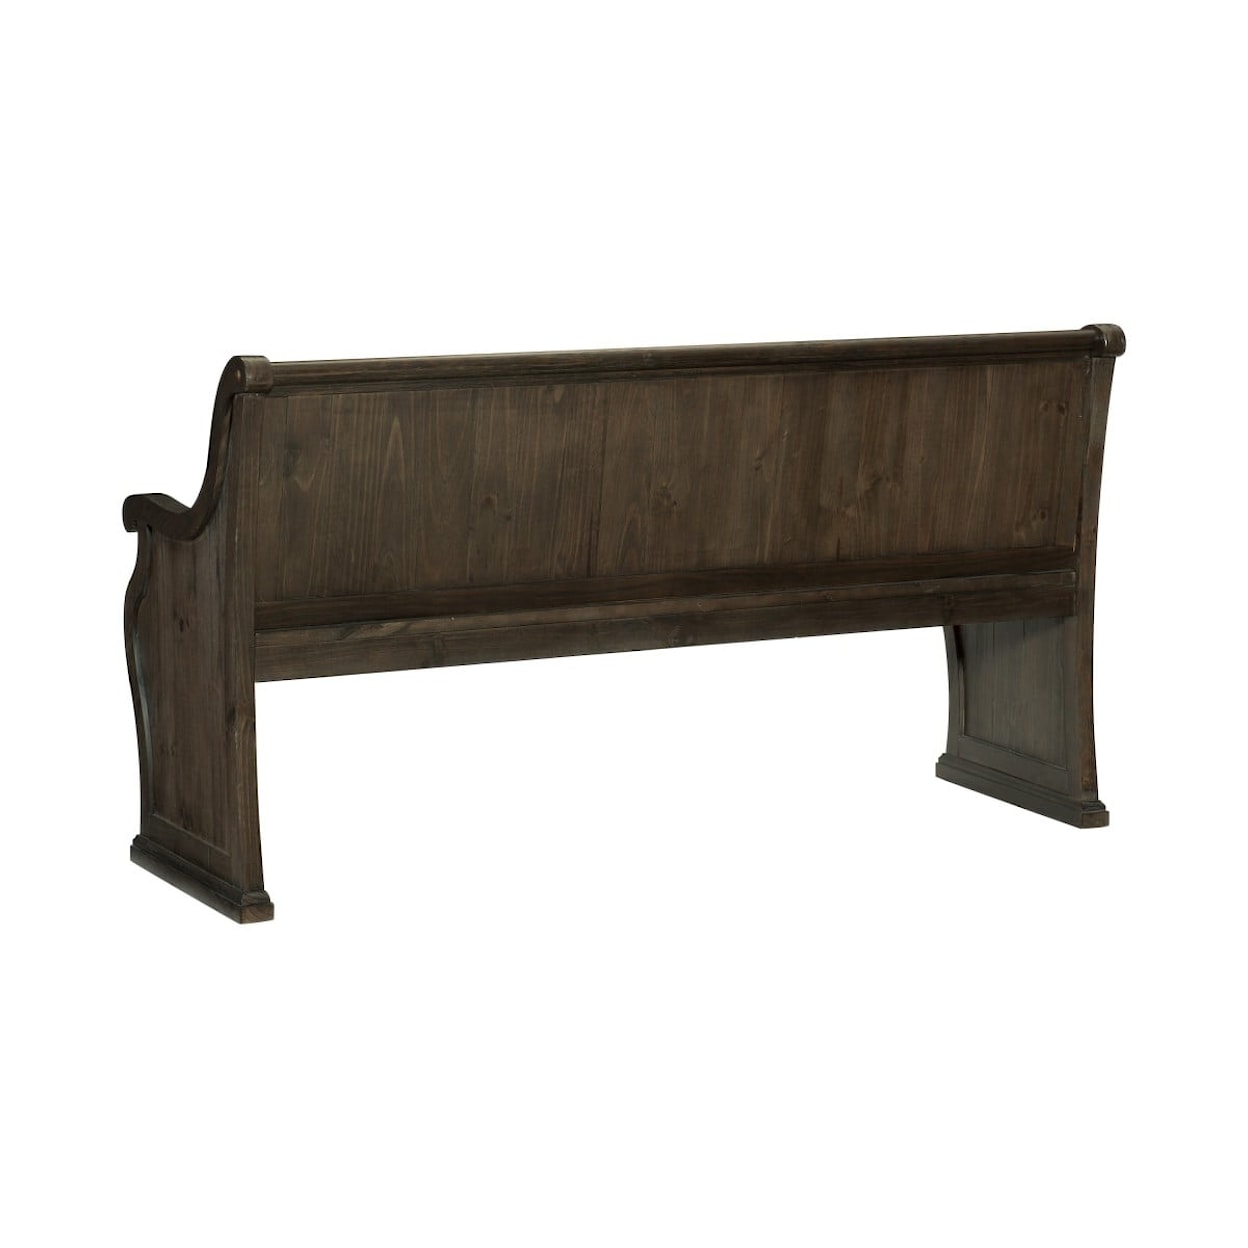 Homelegance Gloversville Dining Bench with Arms